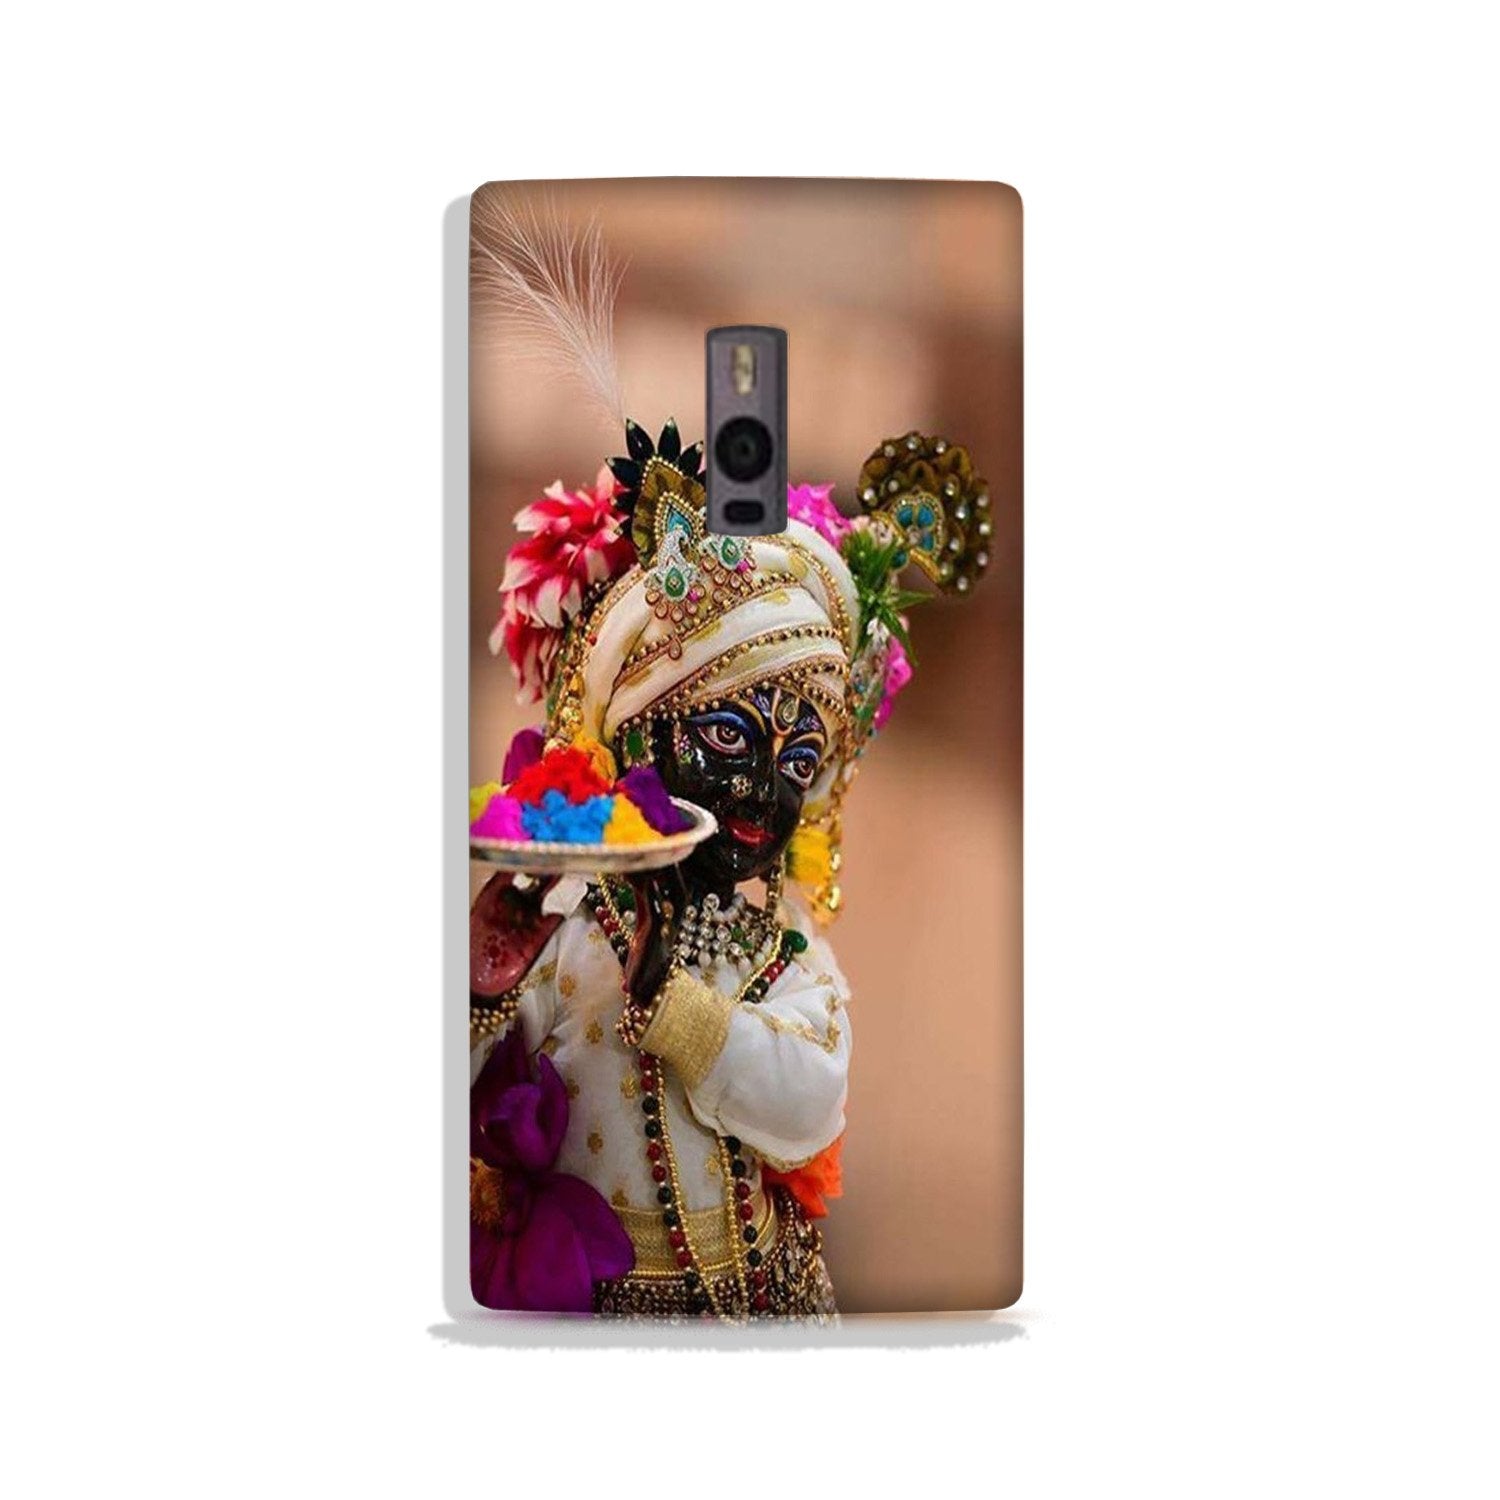 Lord Krishna2 Case for OnePlus 2